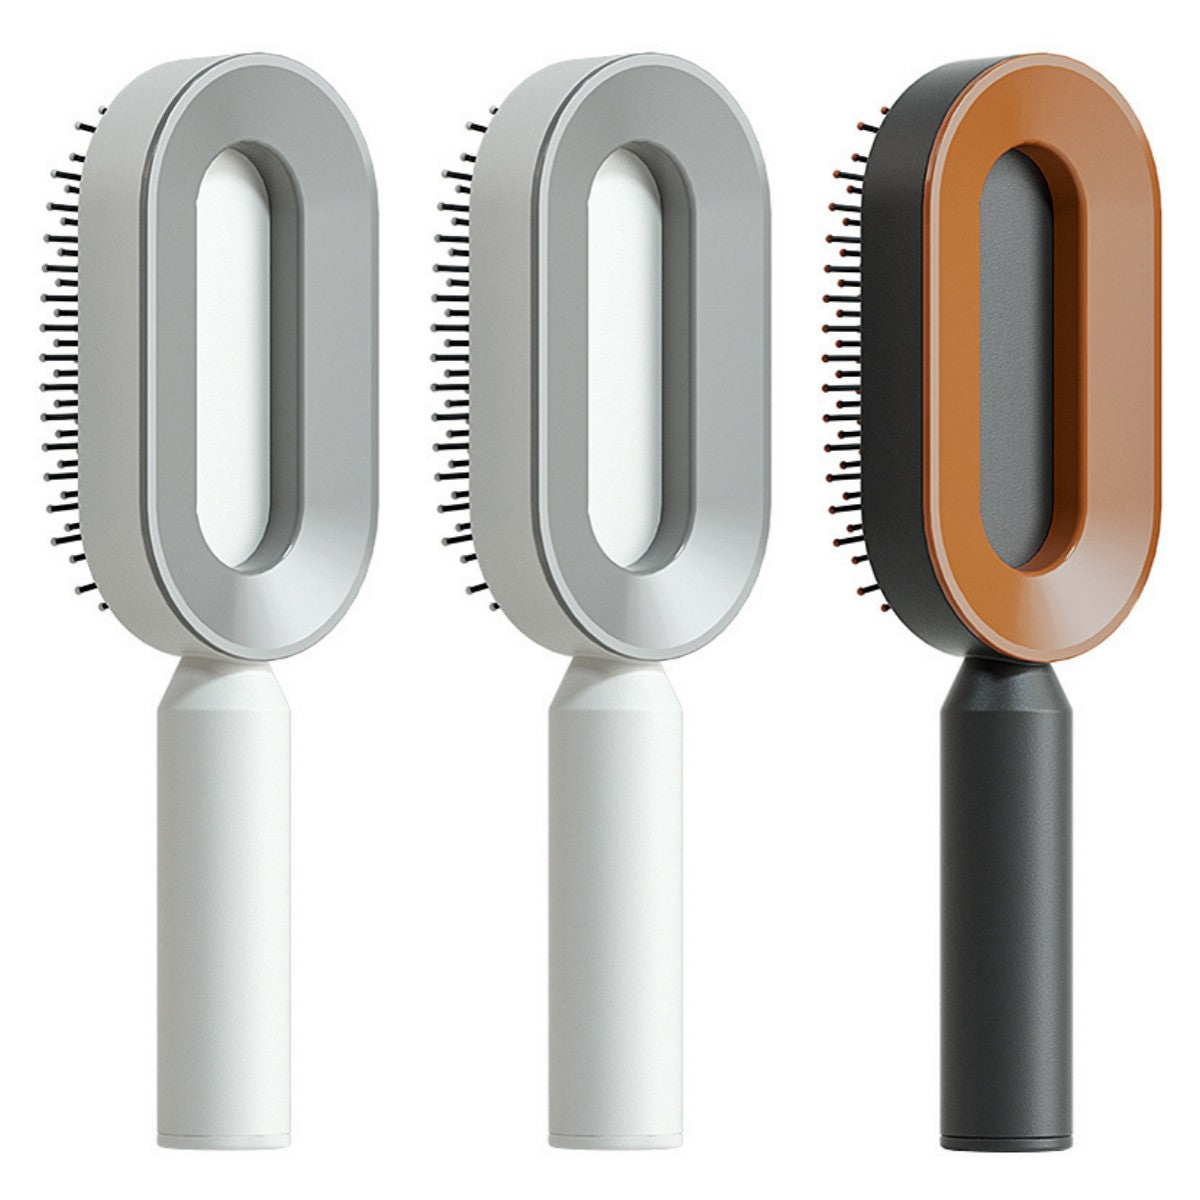 Self Cleaning Hair Brush For Women One-key Cleaning Hair Loss Airbag Massage Scalp Comb Anti-Static Hairbrush Set V